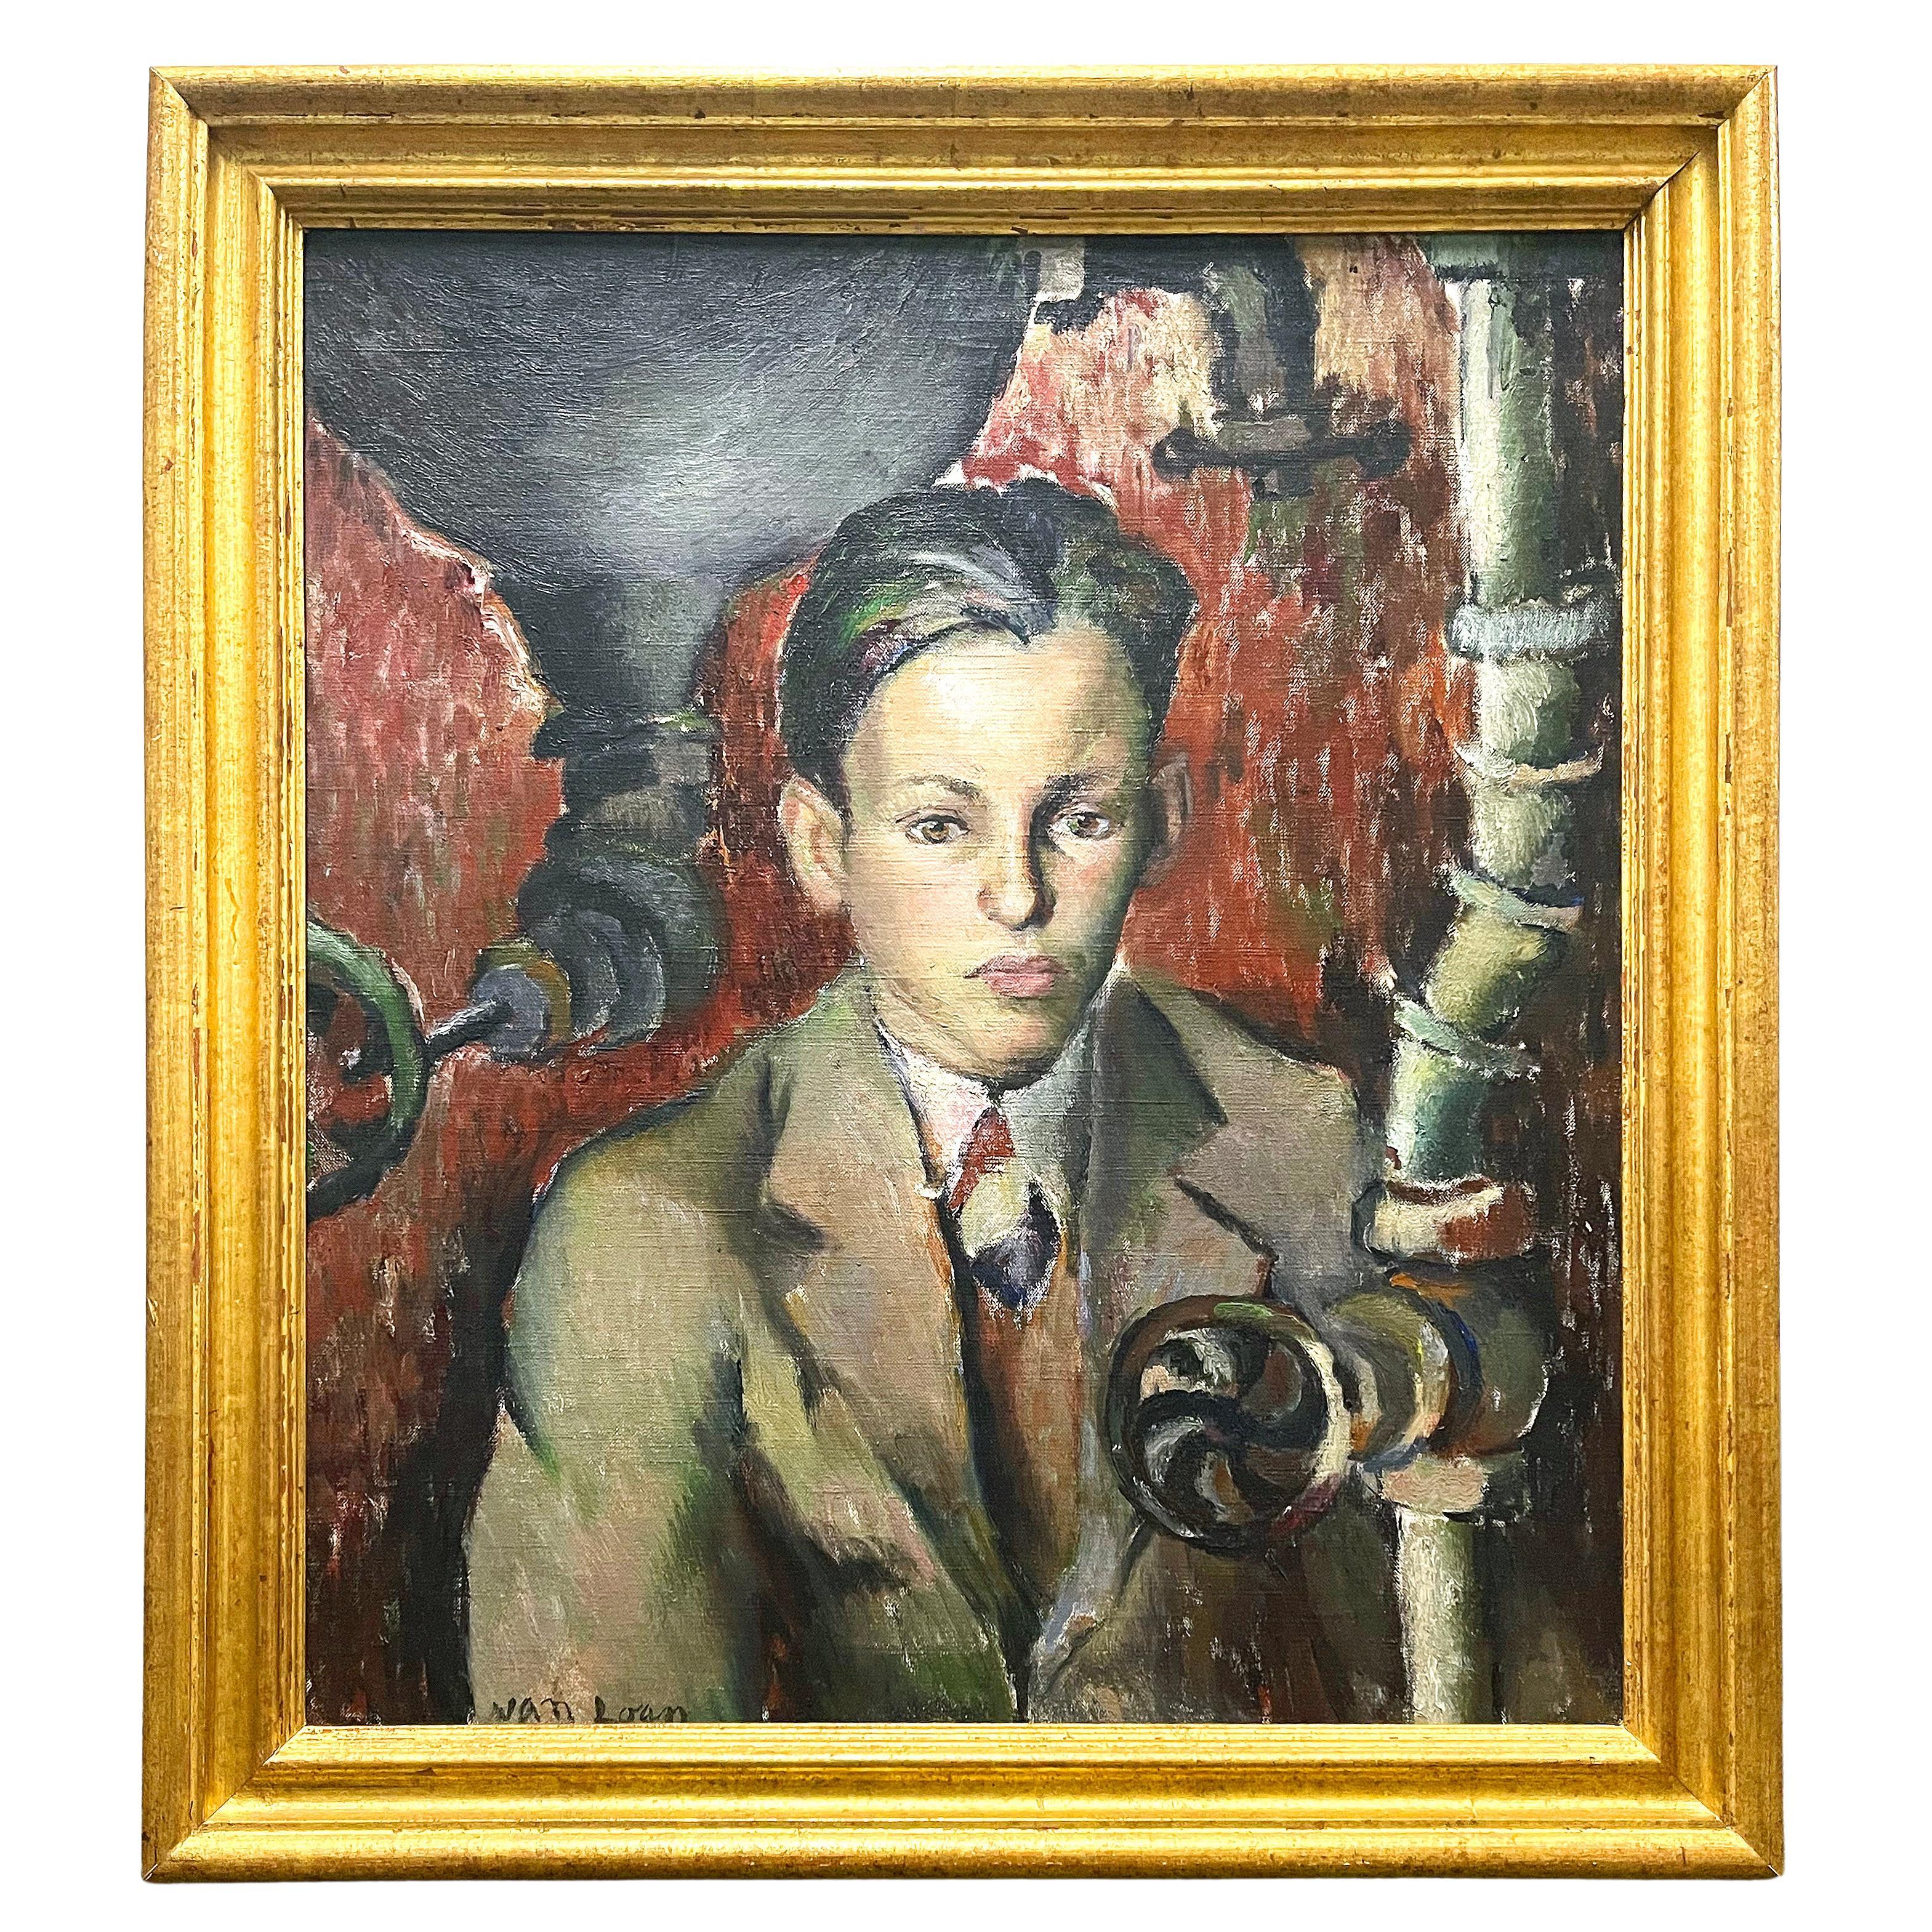 „Youth with Pipes and Valves“, „Sensitives Porträt eines jungen Mannes, Dorothy Van Loan